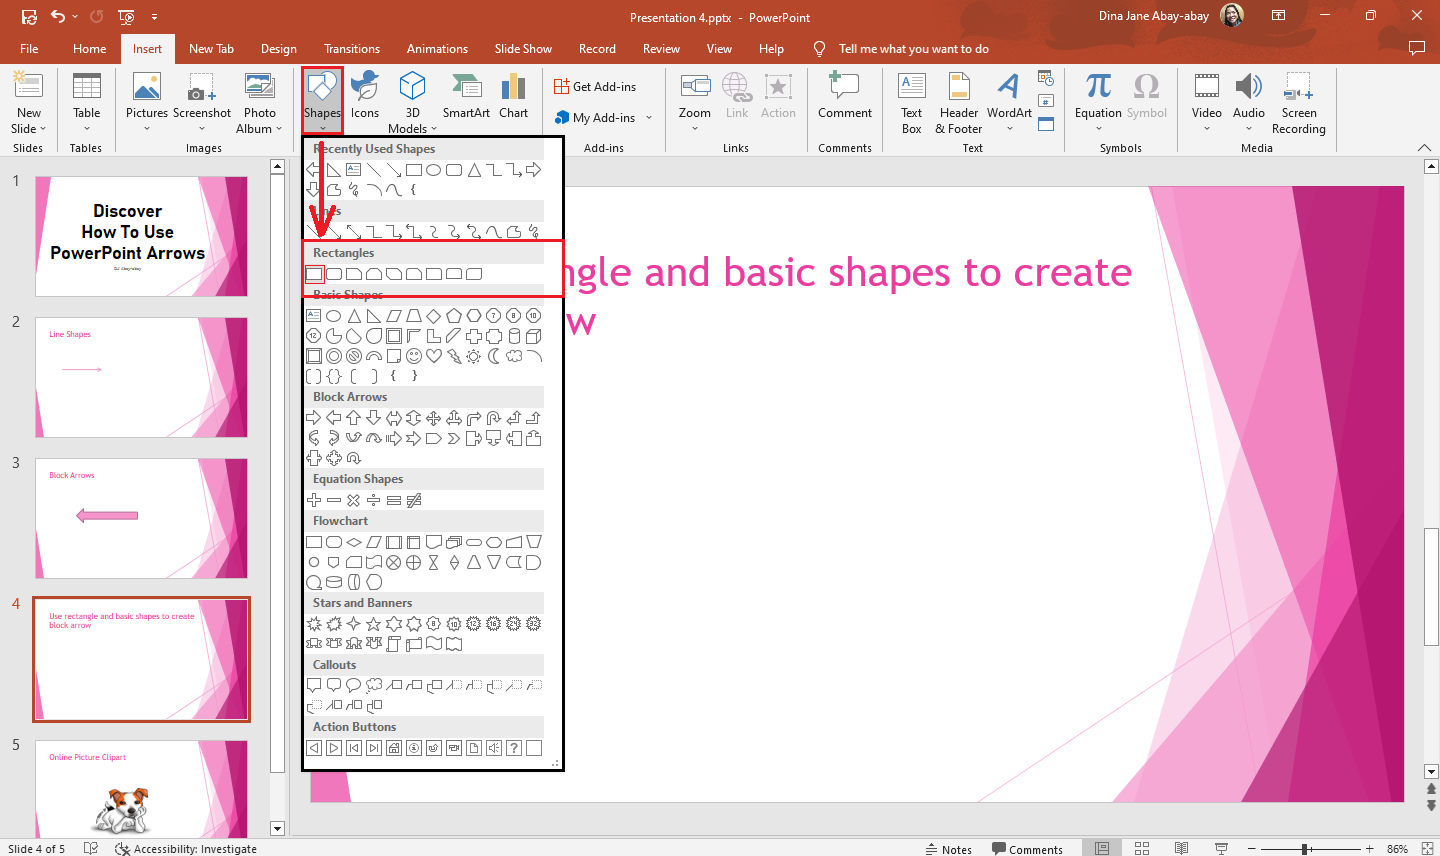 Select the rectangle shape in the "rectangles" section from the drop-down menu and click & draw it on your slide.